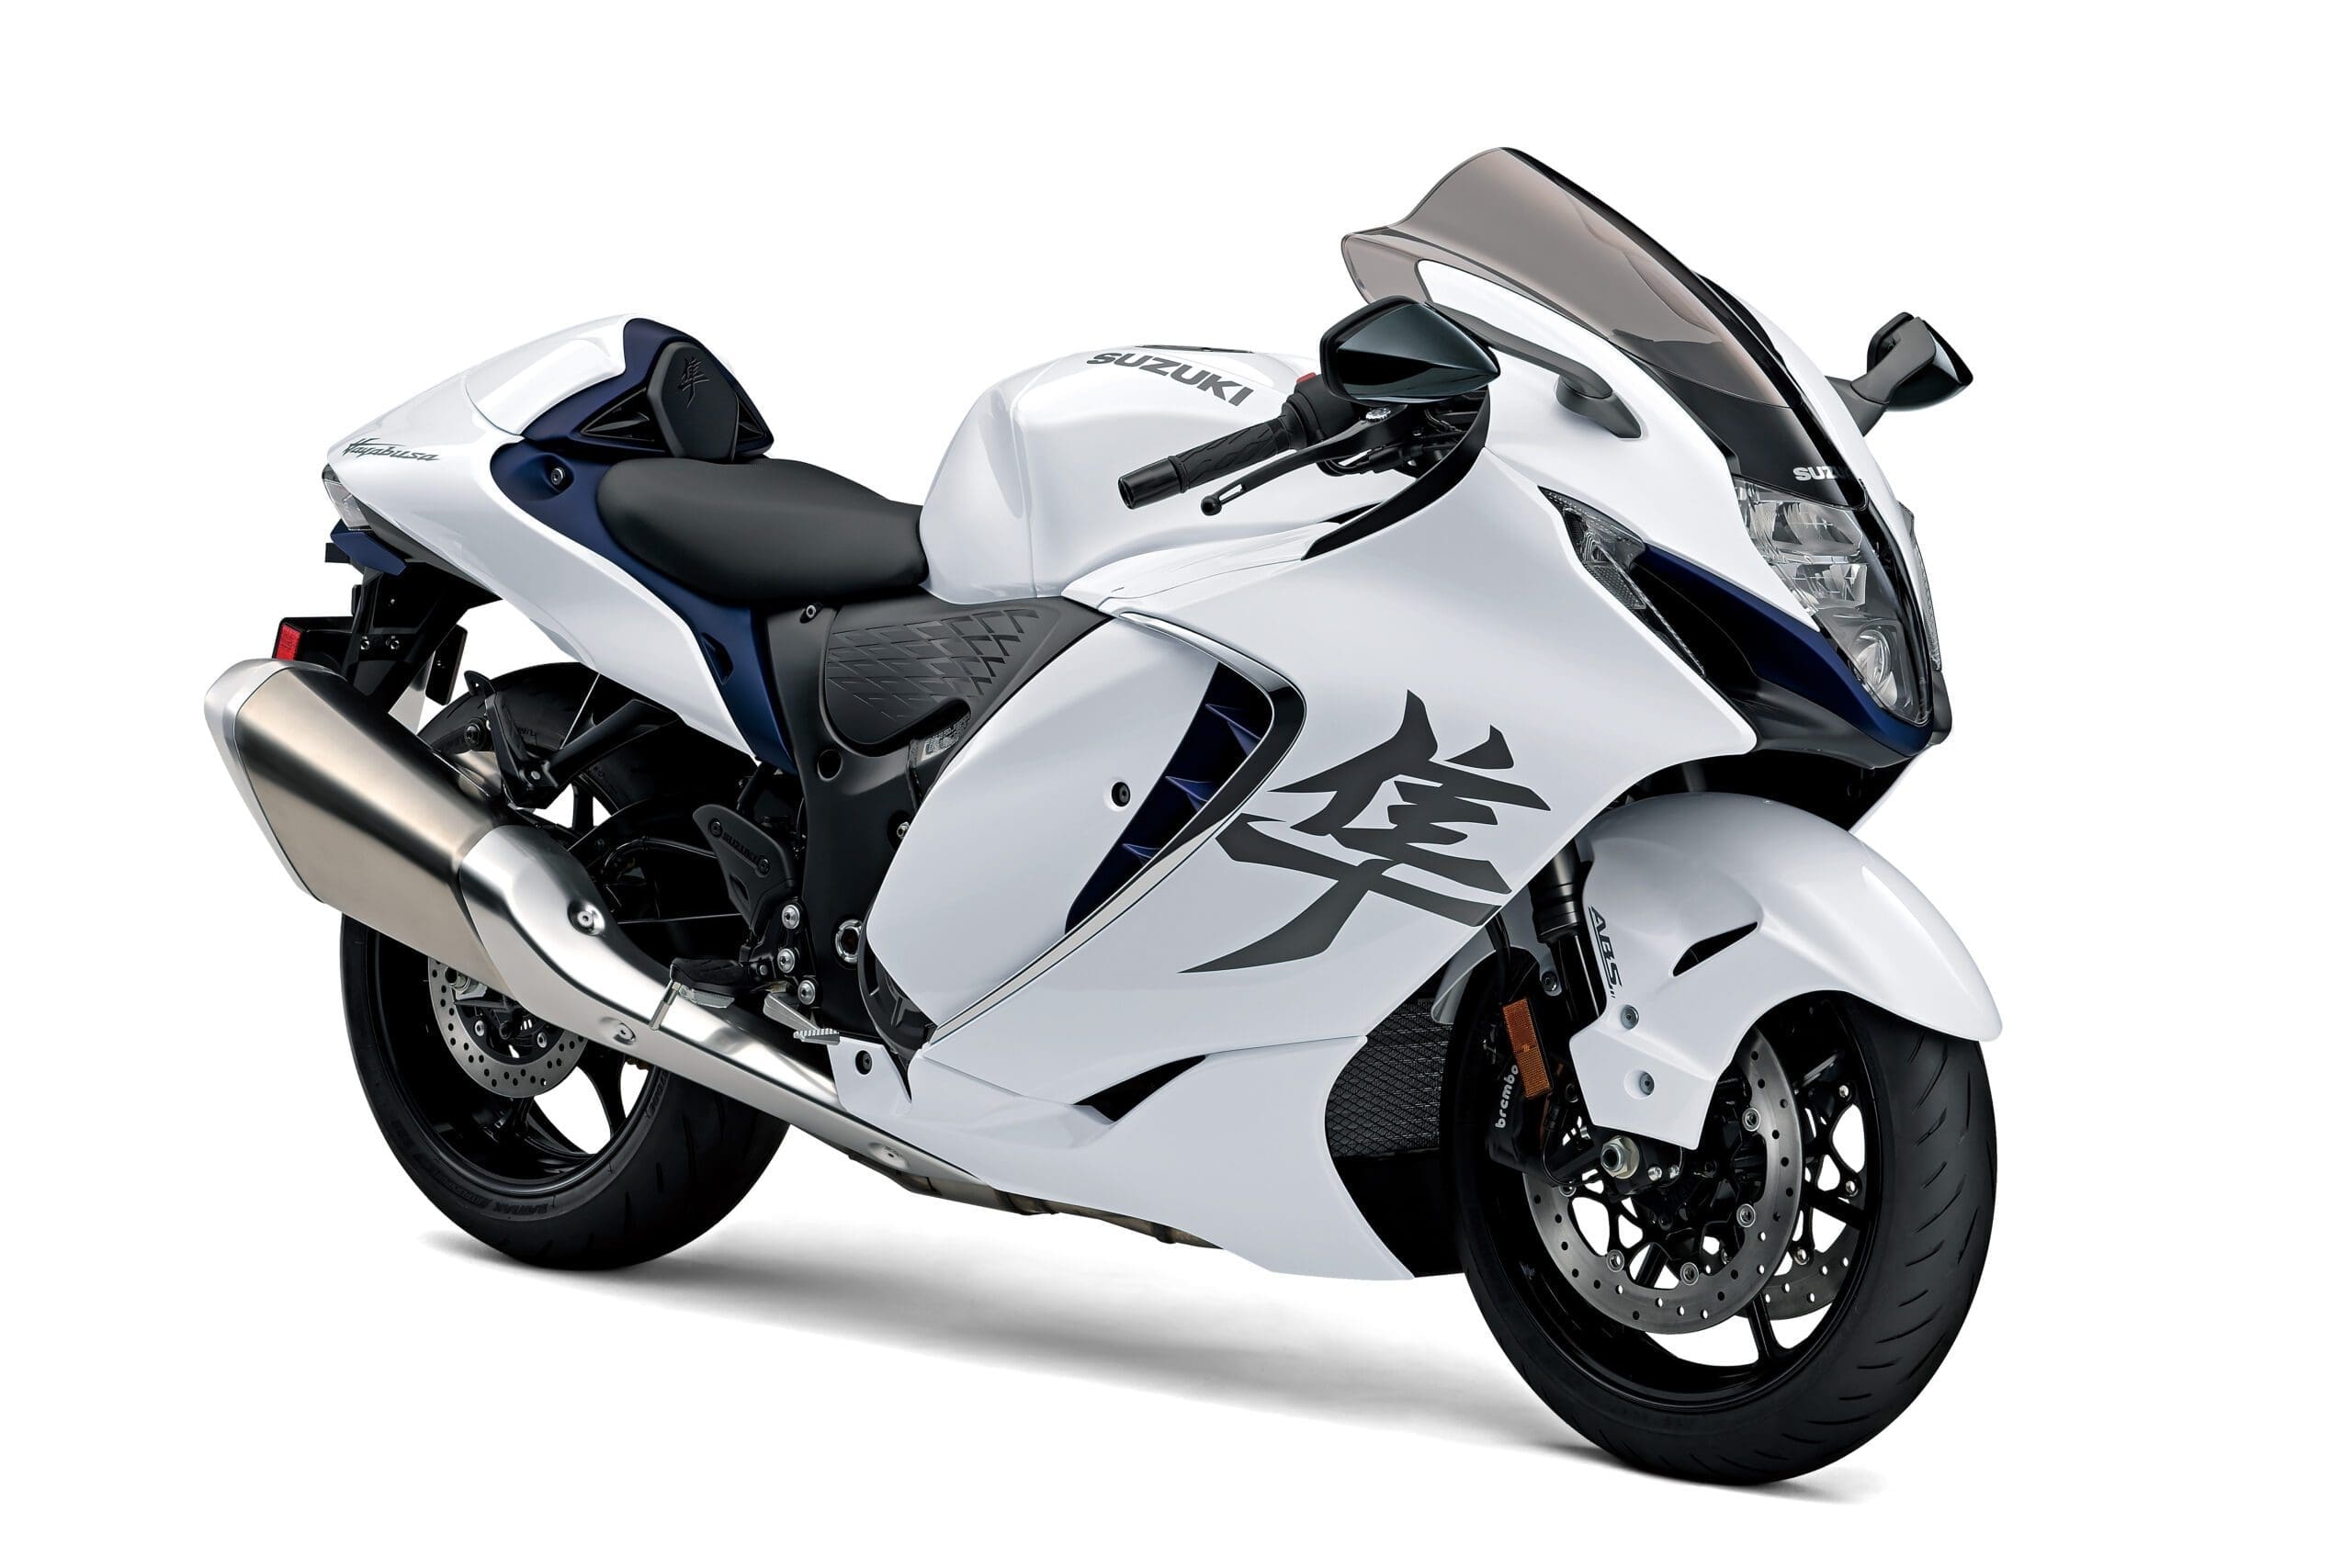 New-for-2022 Hayabusa – it’s a bit of all white!